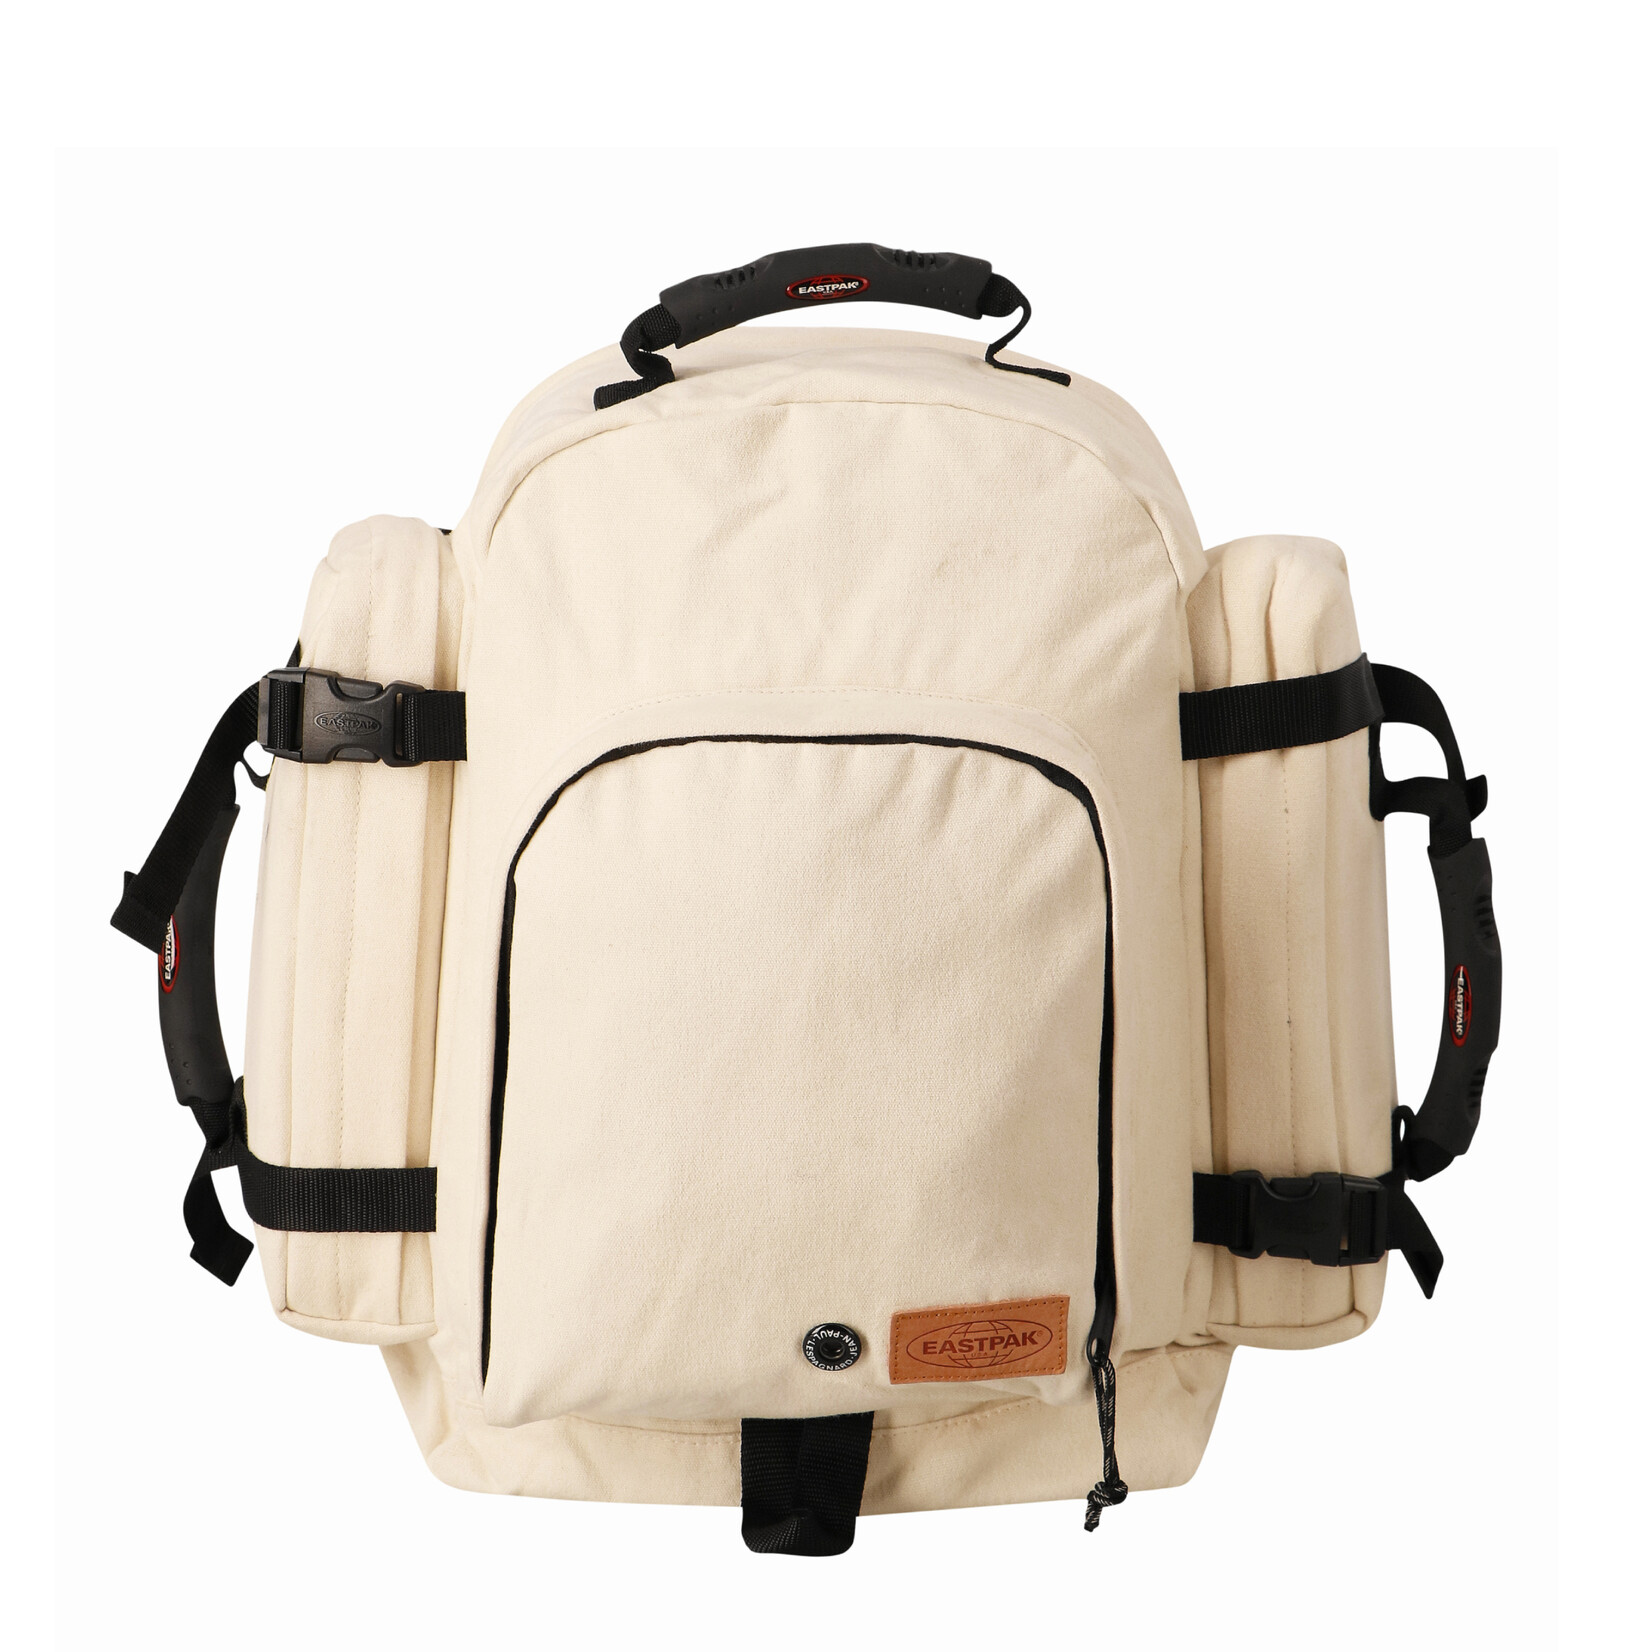 Jean-Paul Lespagnard Small Backpack, Off White & Natural Leather, Eastpak x Jean-Paul Lespagnard